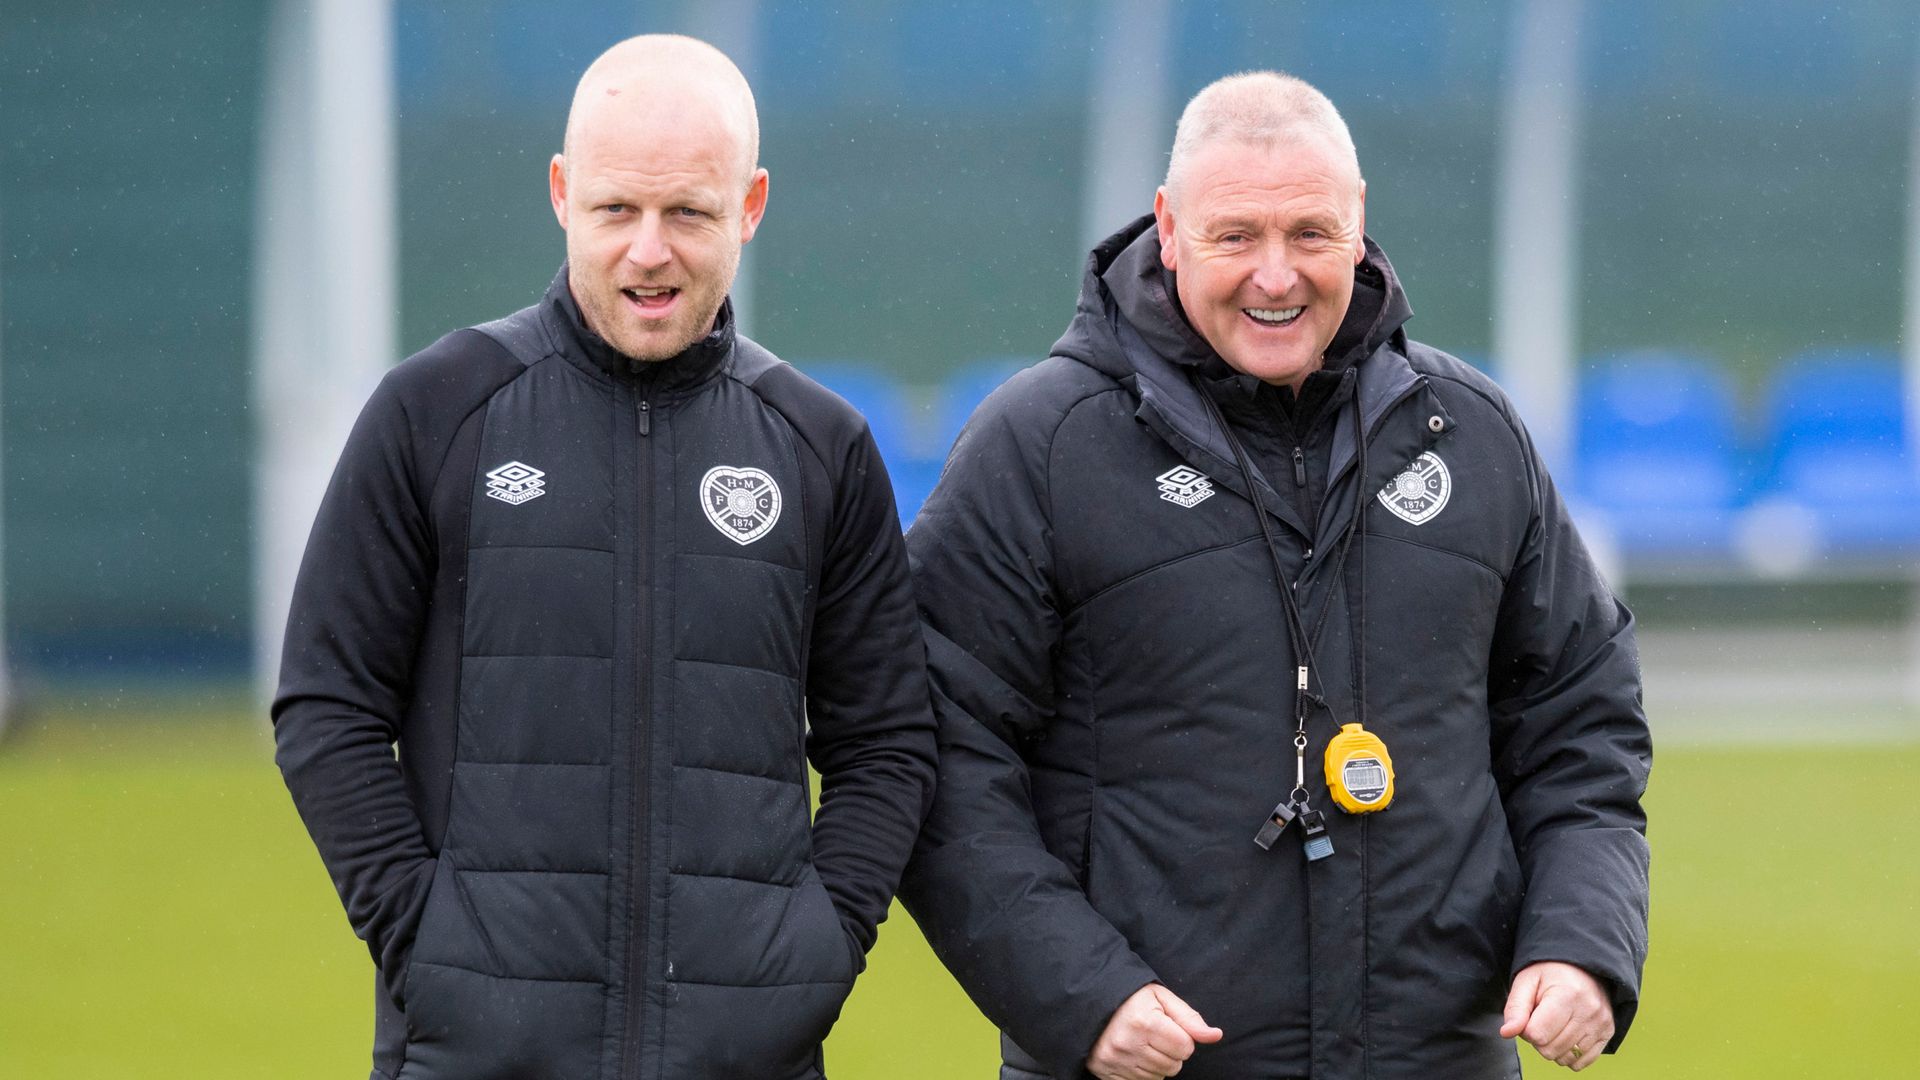 'I'll make the final decision' | Hearts' McAvoy & Naismith explain who's in charge